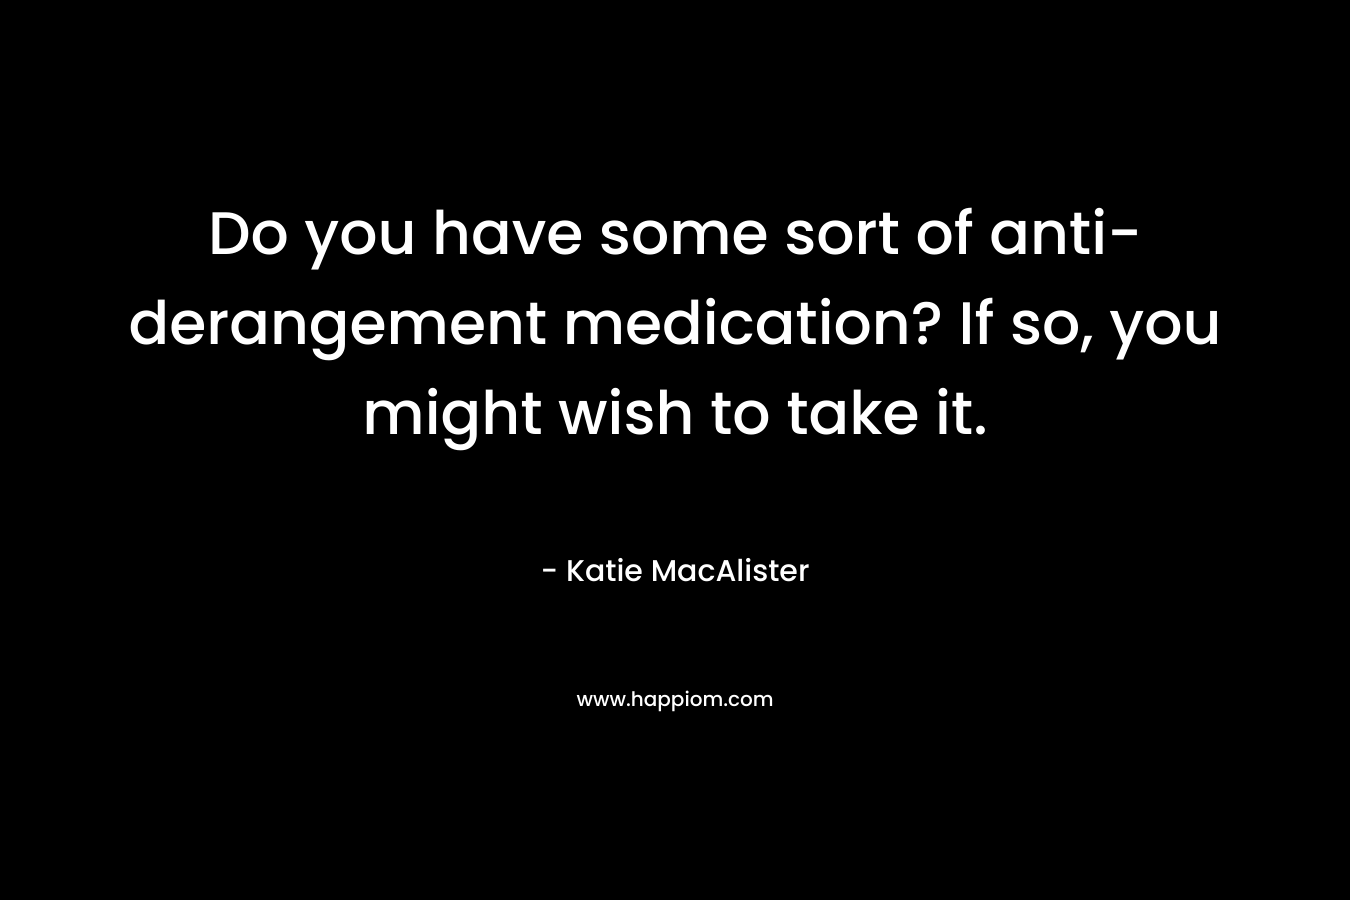 Do you have some sort of anti-derangement medication? If so, you might wish to take it. – Katie MacAlister